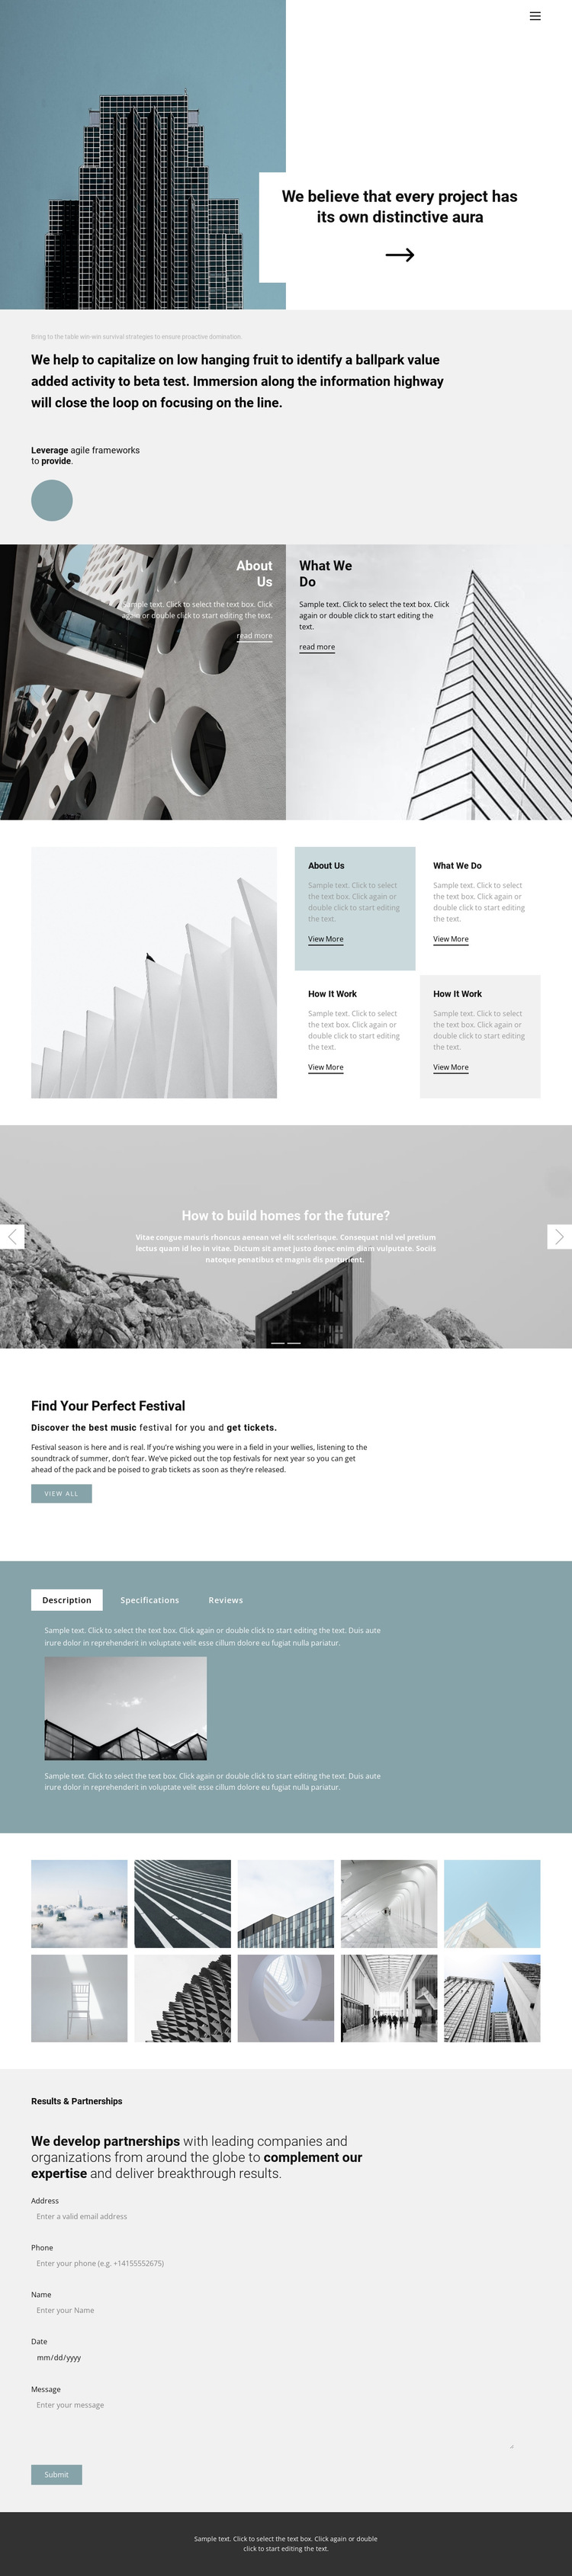 Choose an office for yourself HTML5 Template